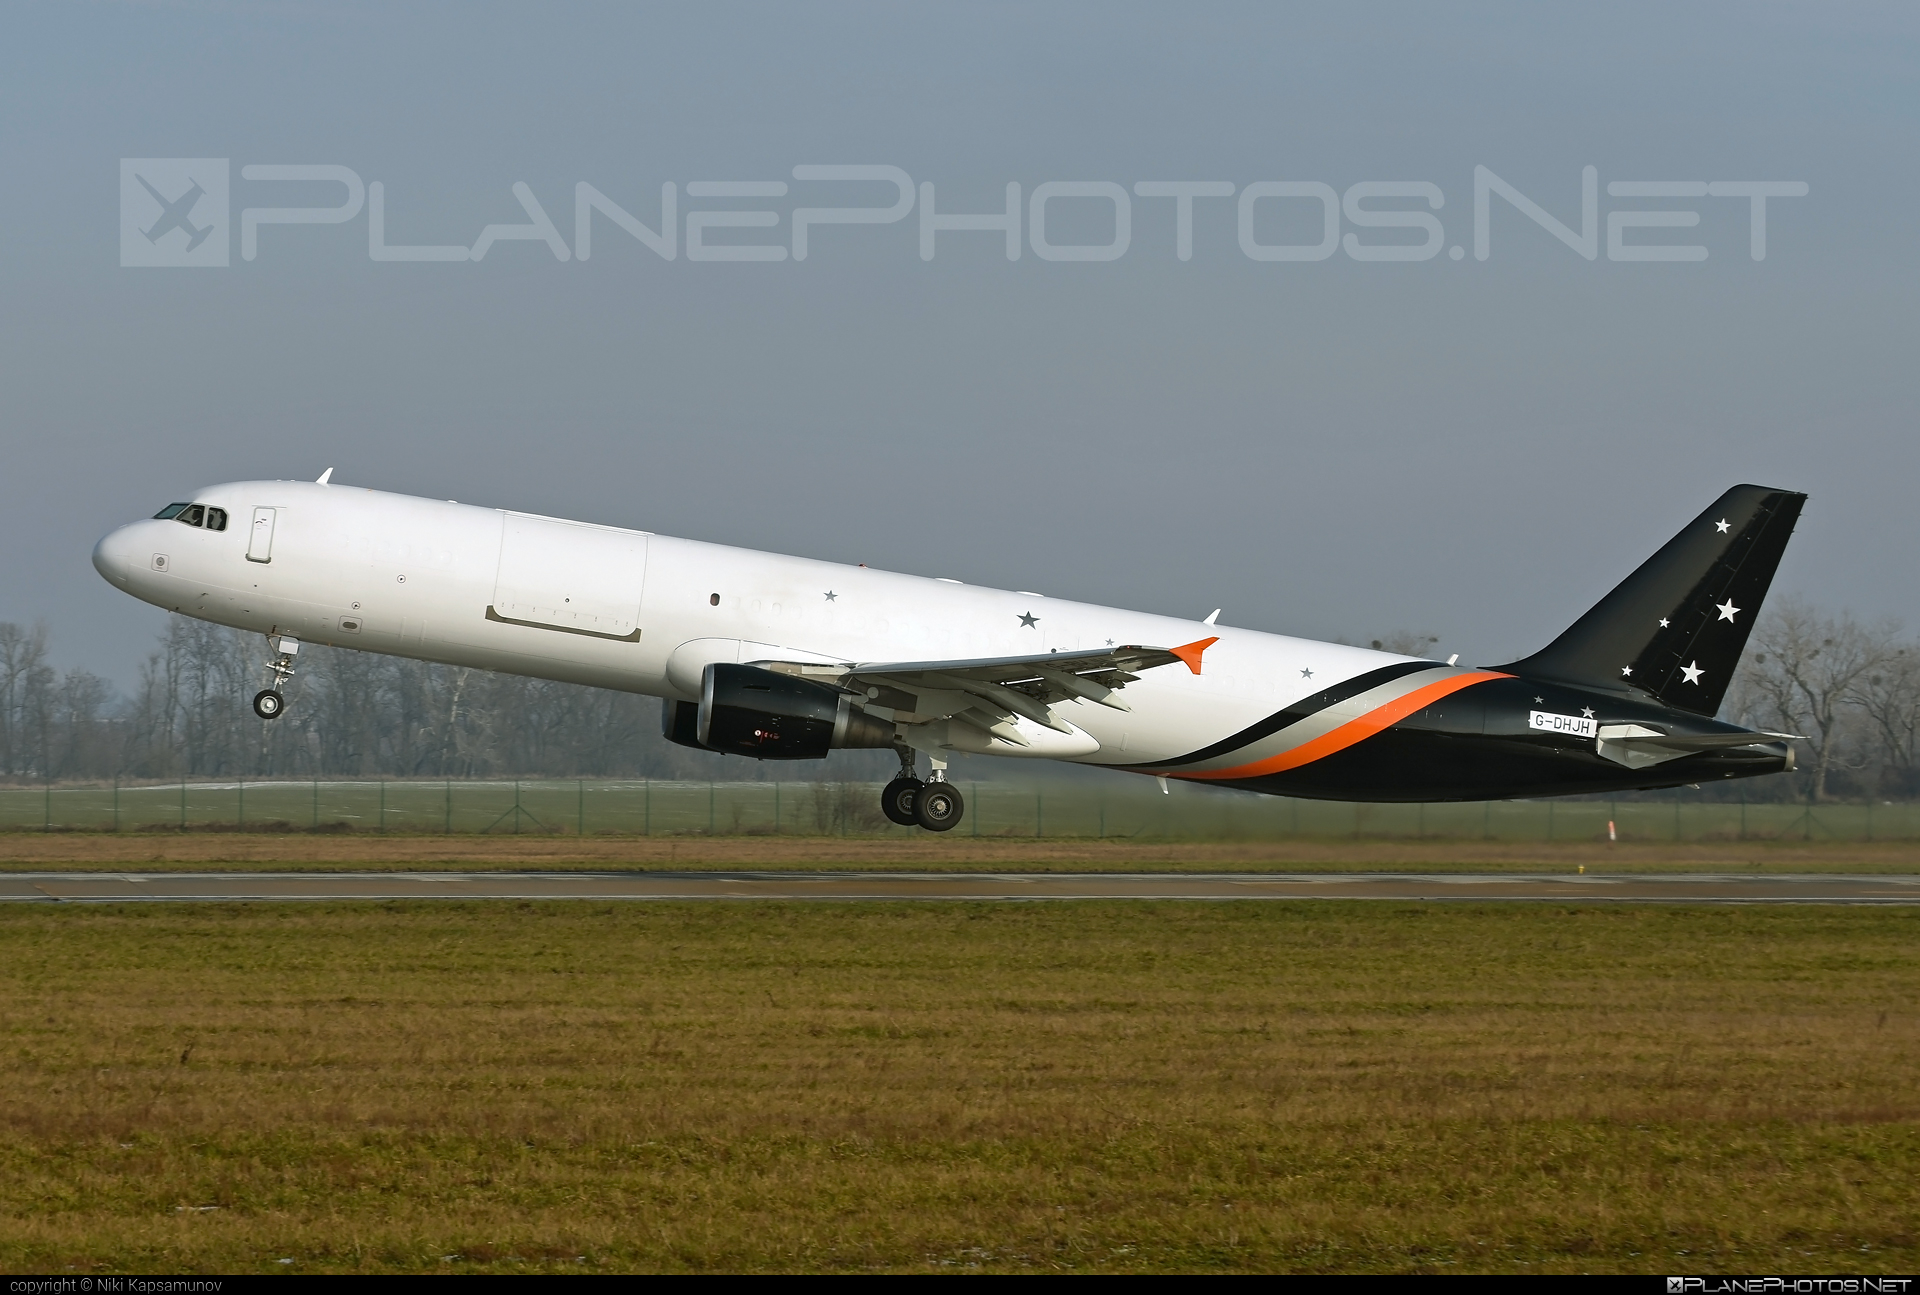 Airbus A321-211P2F - G-POWY operated by Titan Airways #a321freighter #a321p2f #airbus #titanairways